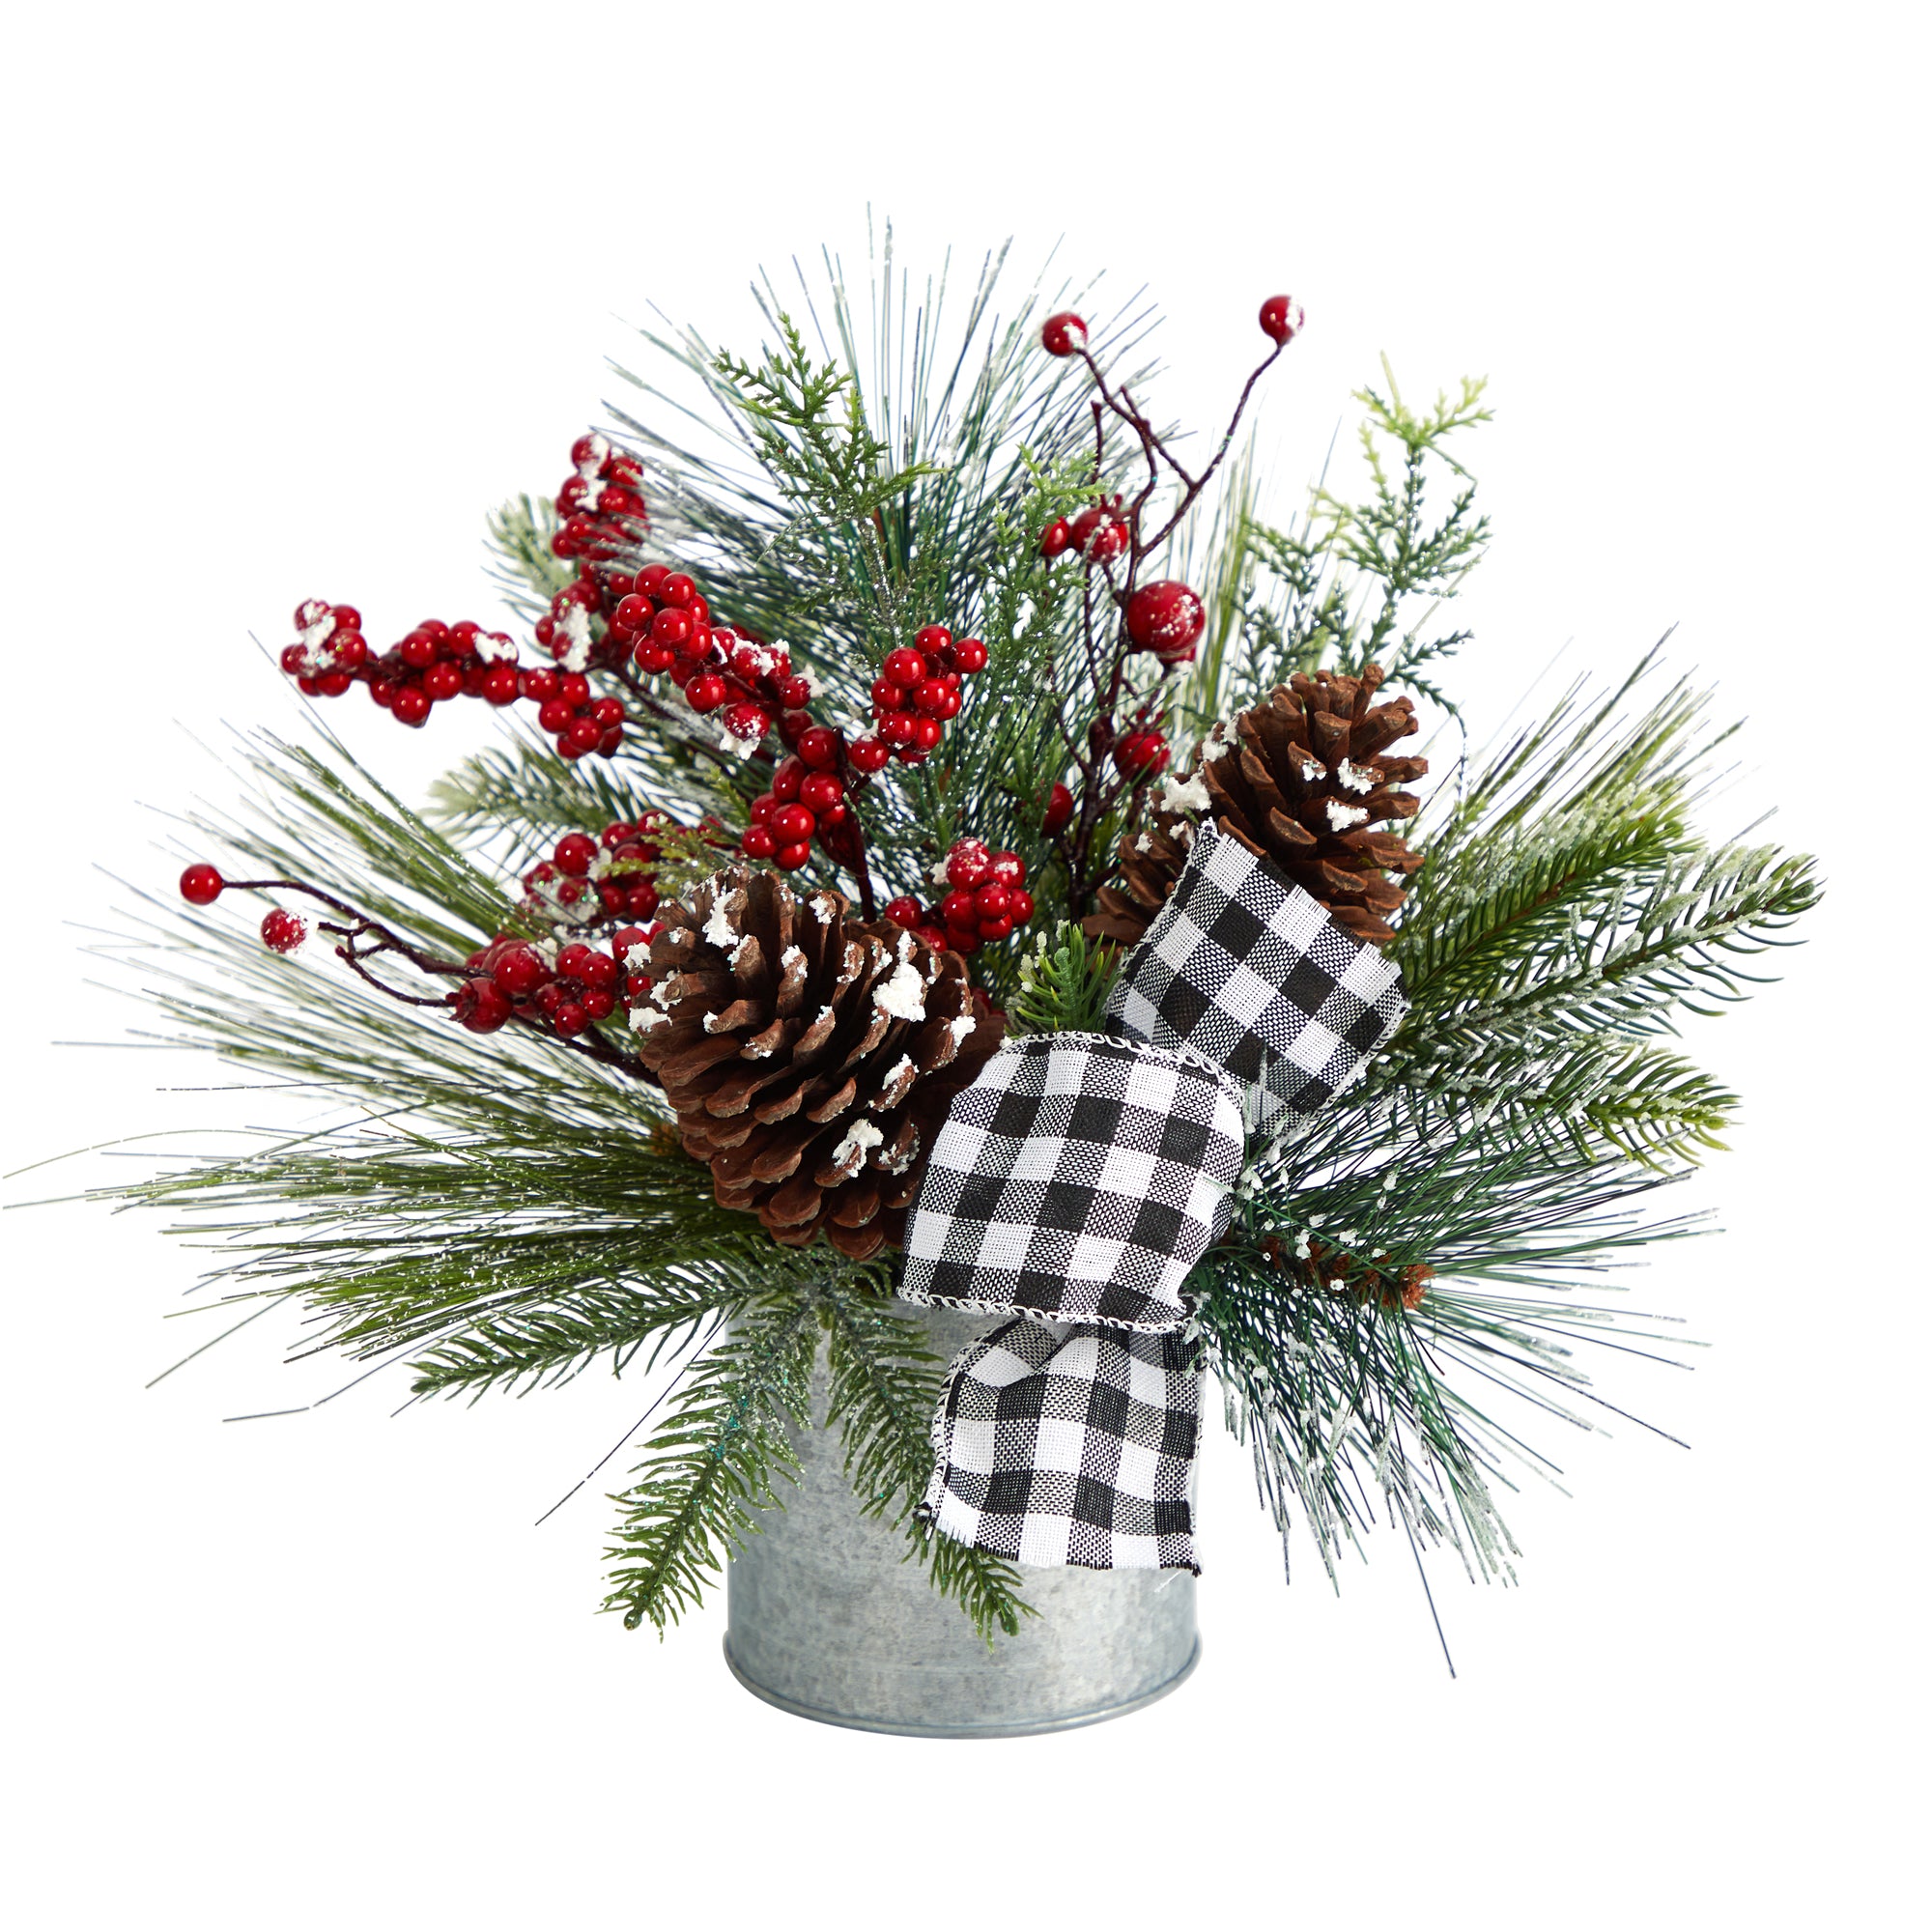 12"� Frosted Pinecones and Berries Artificial Arrangement in Vase with Decorative Plaid Bow